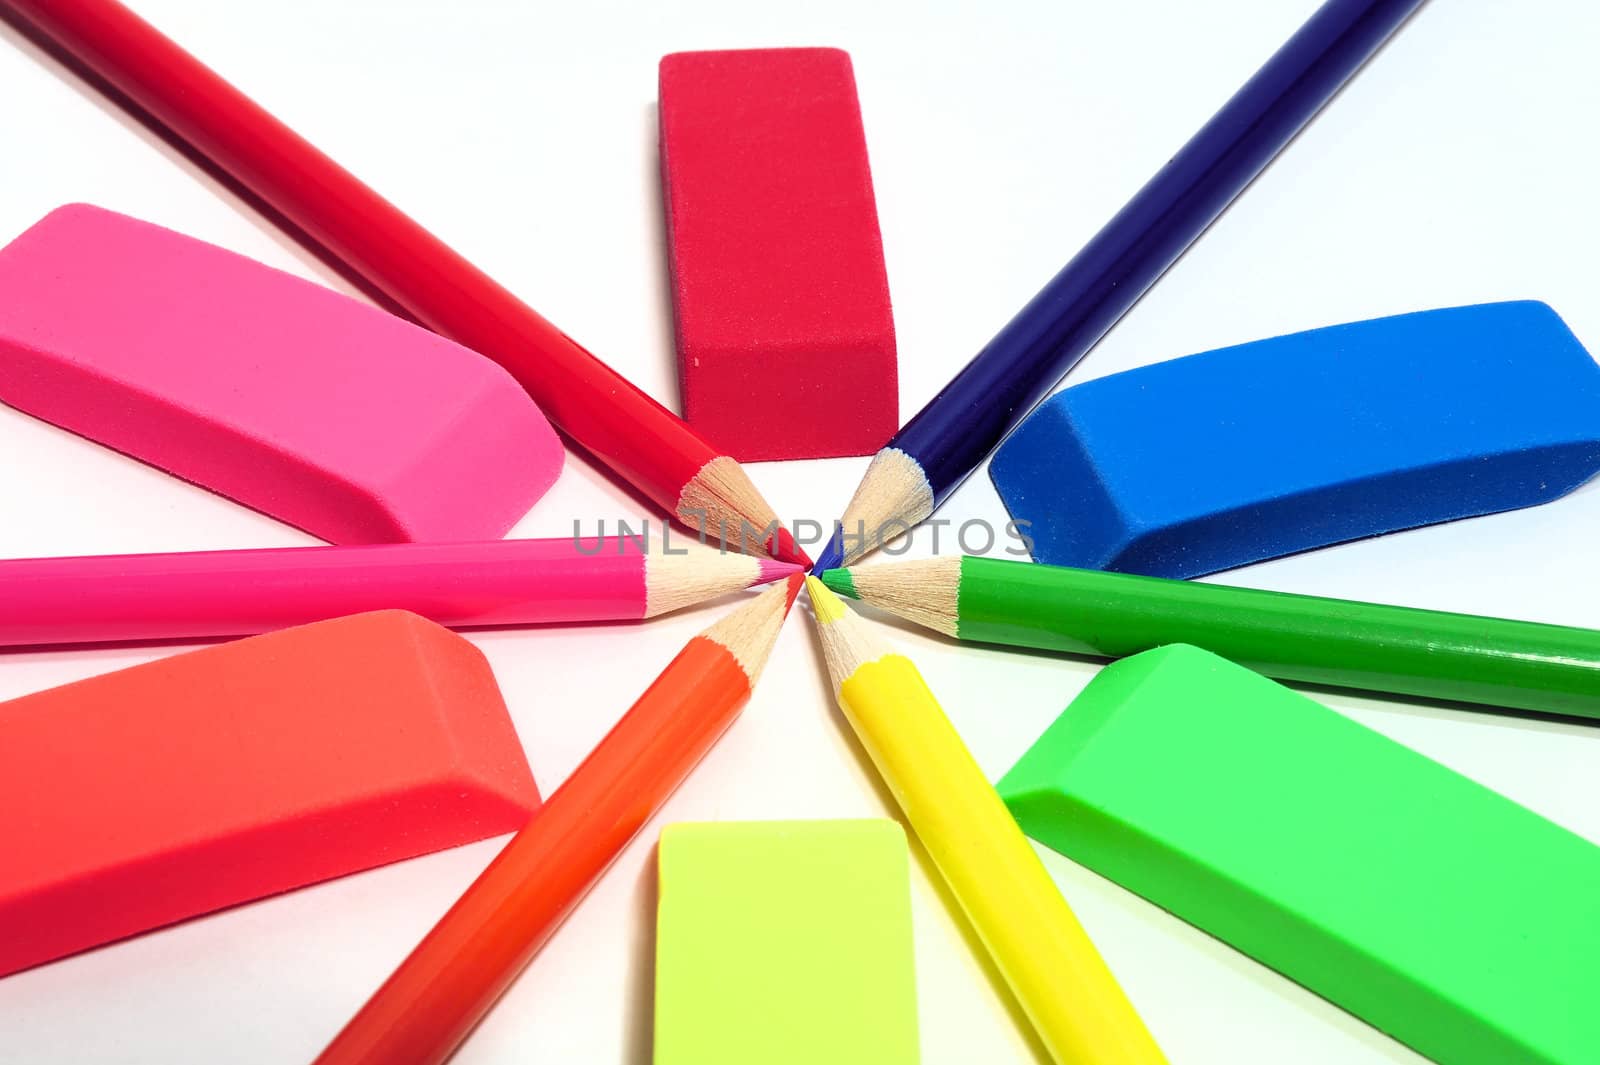 Colored pencils and erasers in various color shades